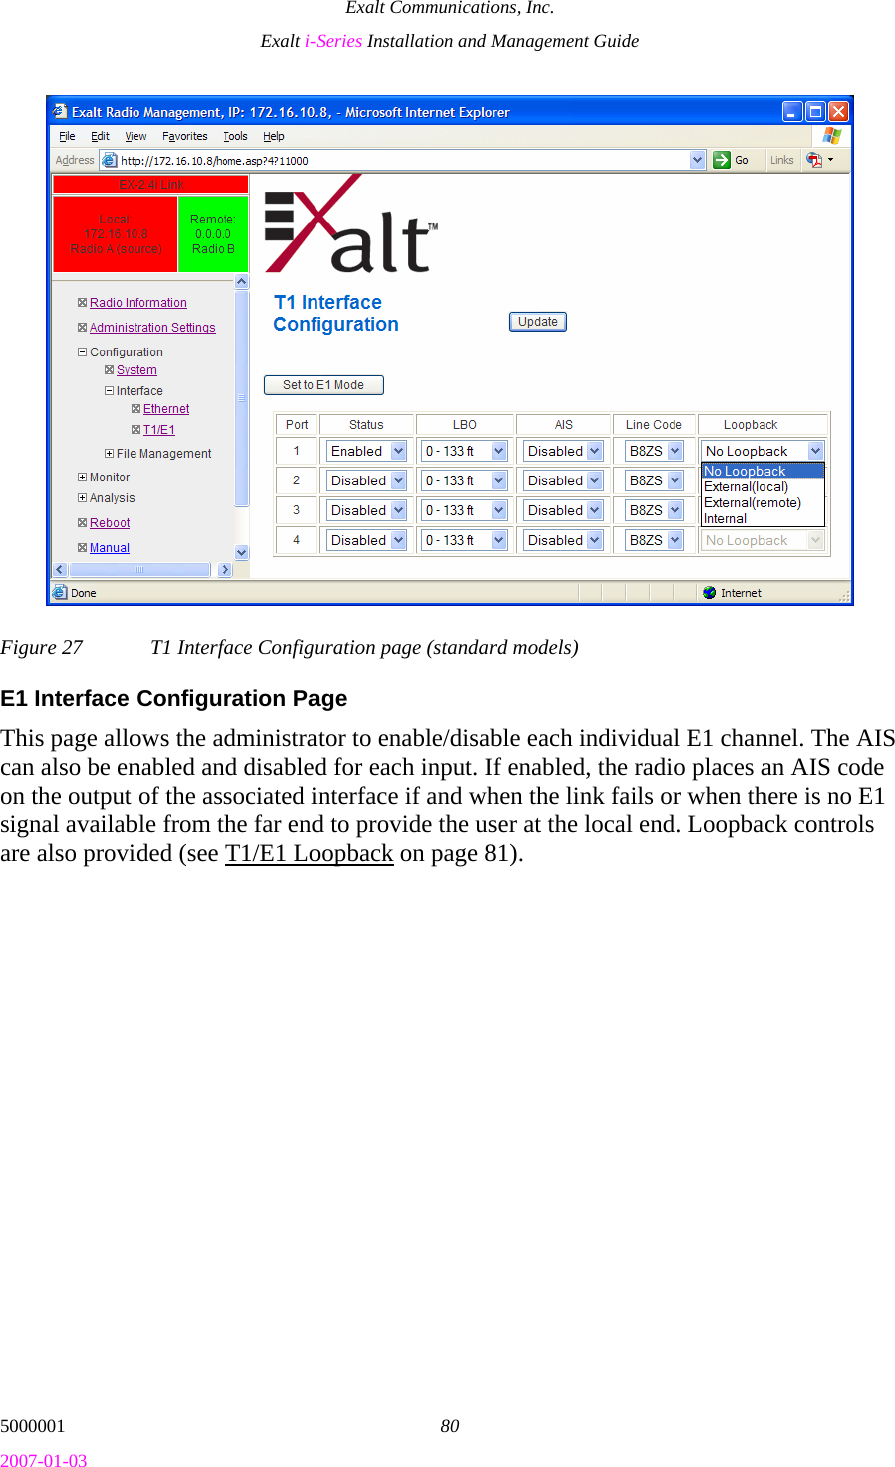 Exalt Communications, Inc. Exalt i-Series Installation and Management Guide 5000001  80 2007-01-03 Figure 27  T1 Interface Configuration page (standard models) E1 Interface Configuration Page This page allows the administrator to enable/disable each individual E1 channel. The AIS can also be enabled and disabled for each input. If enabled, the radio places an AIS code on the output of the associated interface if and when the link fails or when there is no E1 signal available from the far end to provide the user at the local end. Loopback controls are also provided (see T1/E1 Loopback on page 81). 